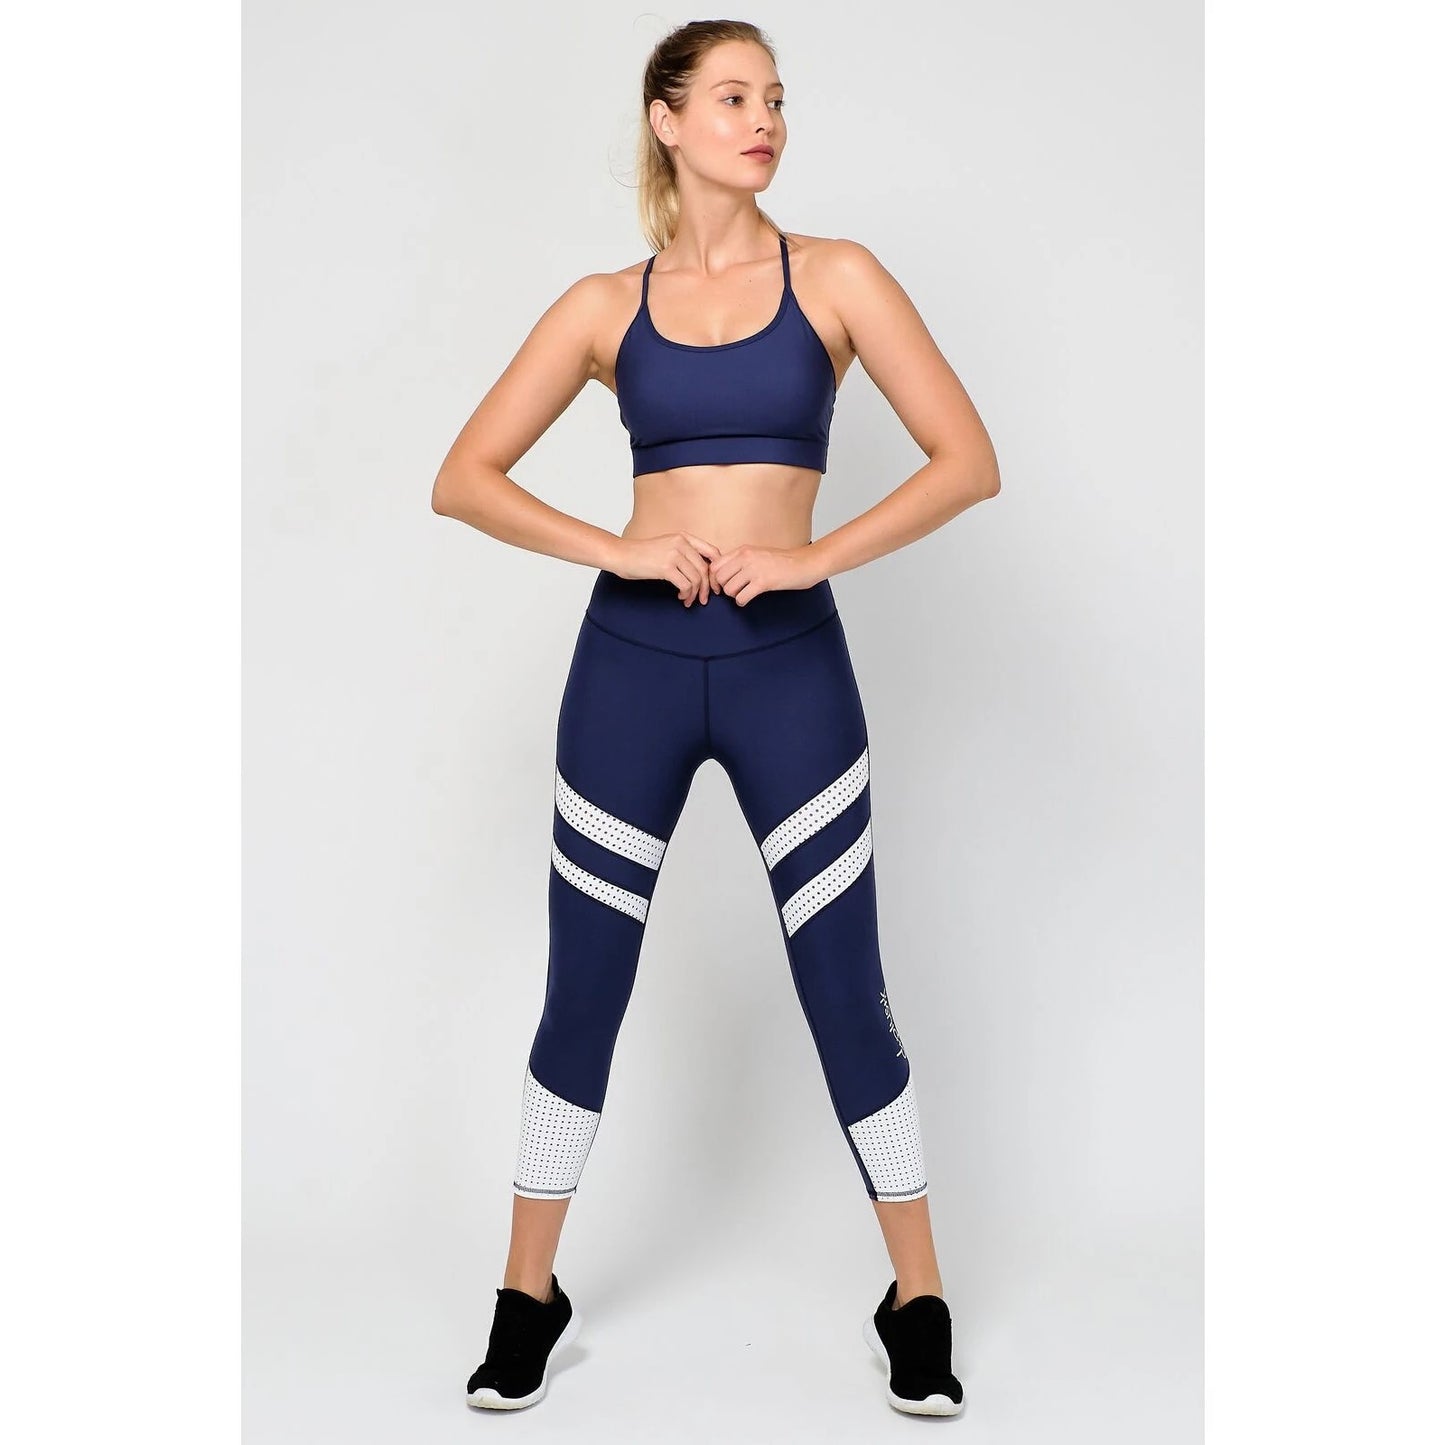  Blurred Lines Tight! With a supportive and high waisted performance fit, you’ll feel ready for anything that comes your way! The white mesh panels add breathability and statement style. 